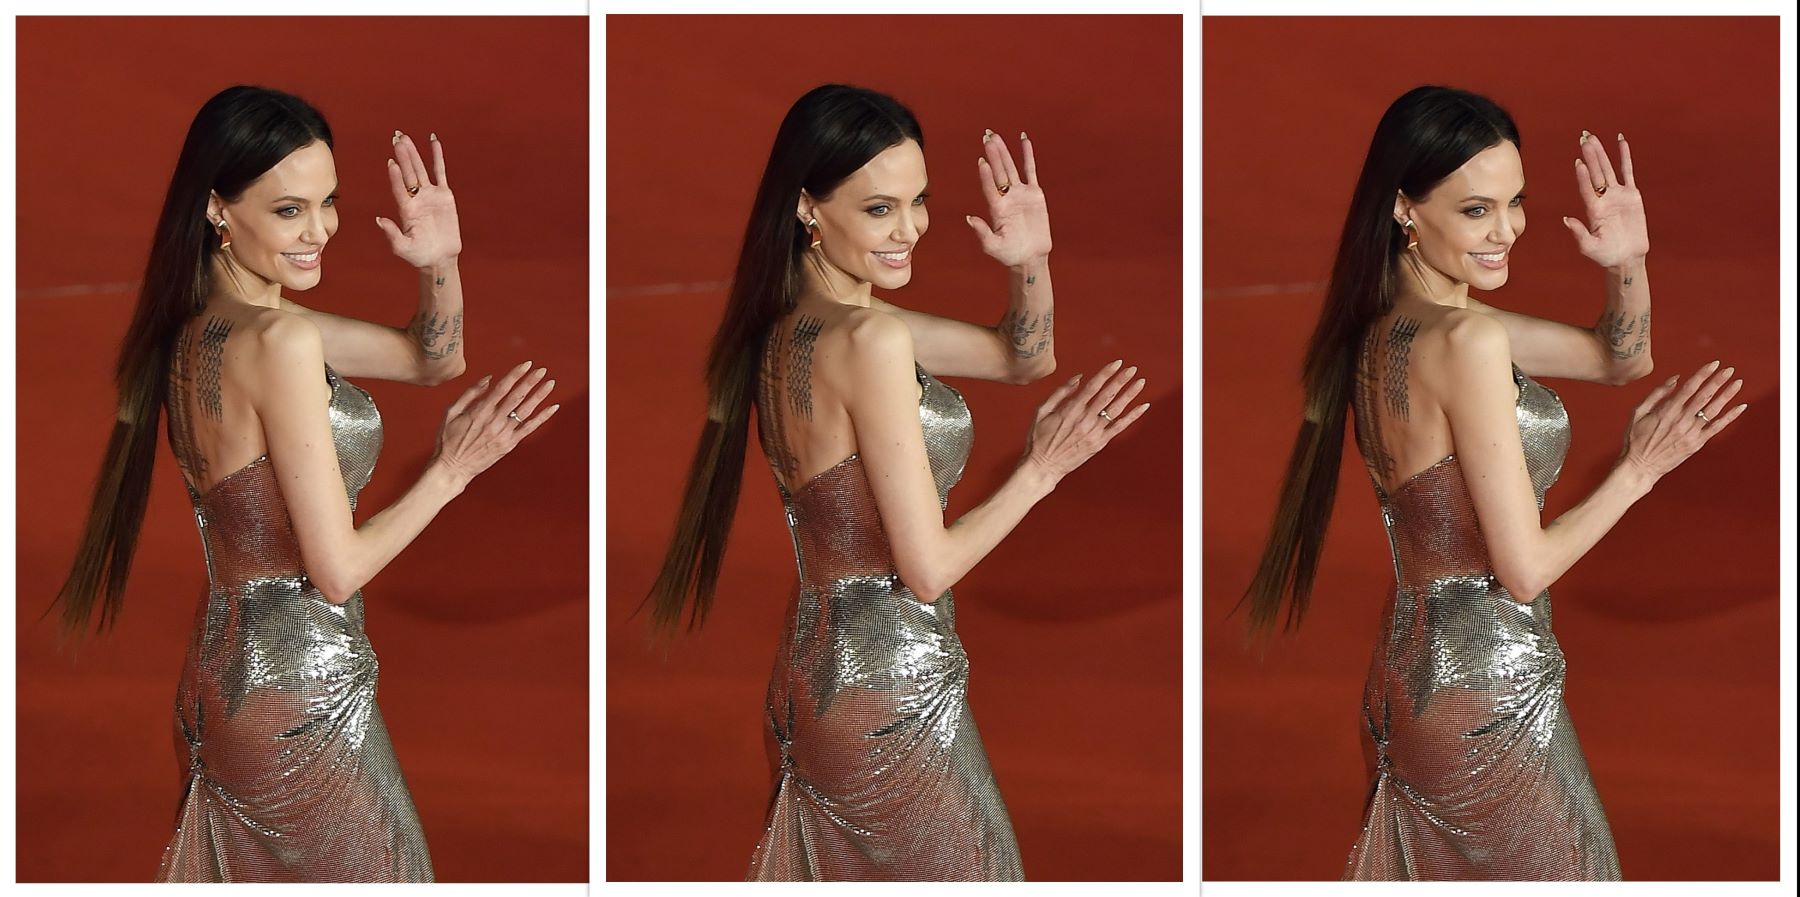 Image of Angelina Jolie hair extensions on the red carpet. Taken from Instagram